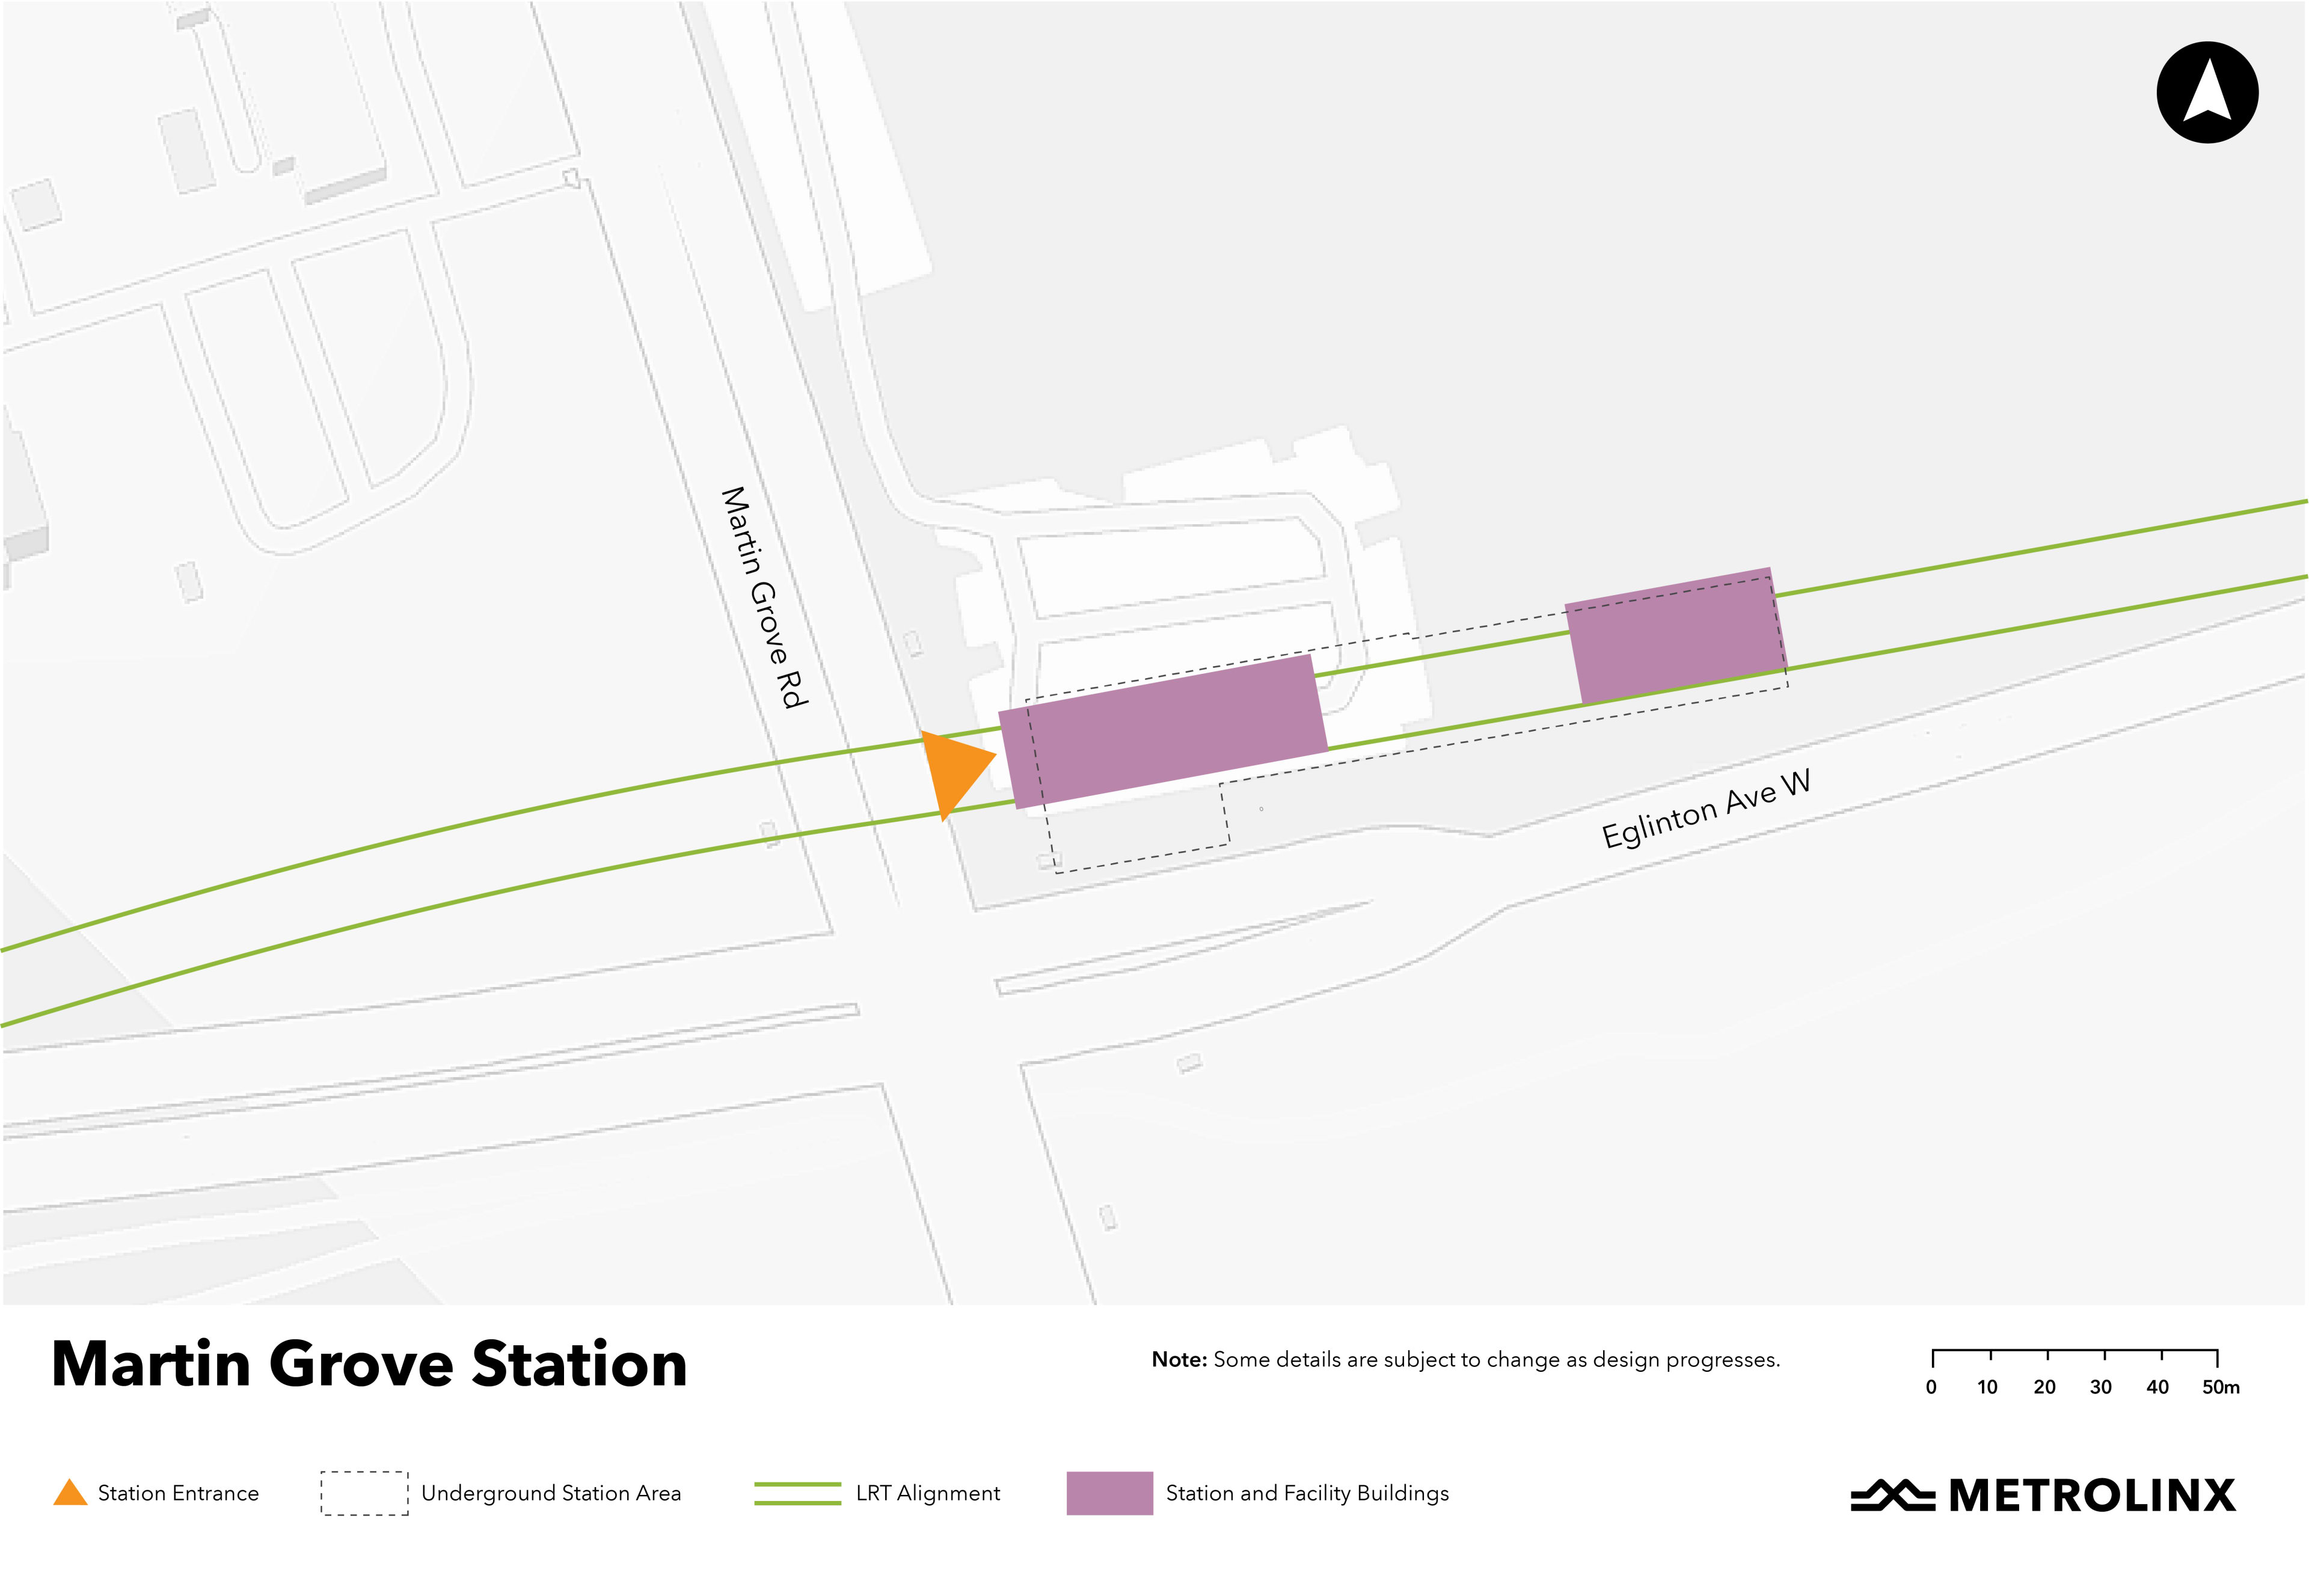 A map of the area around the future Martin Grove Station